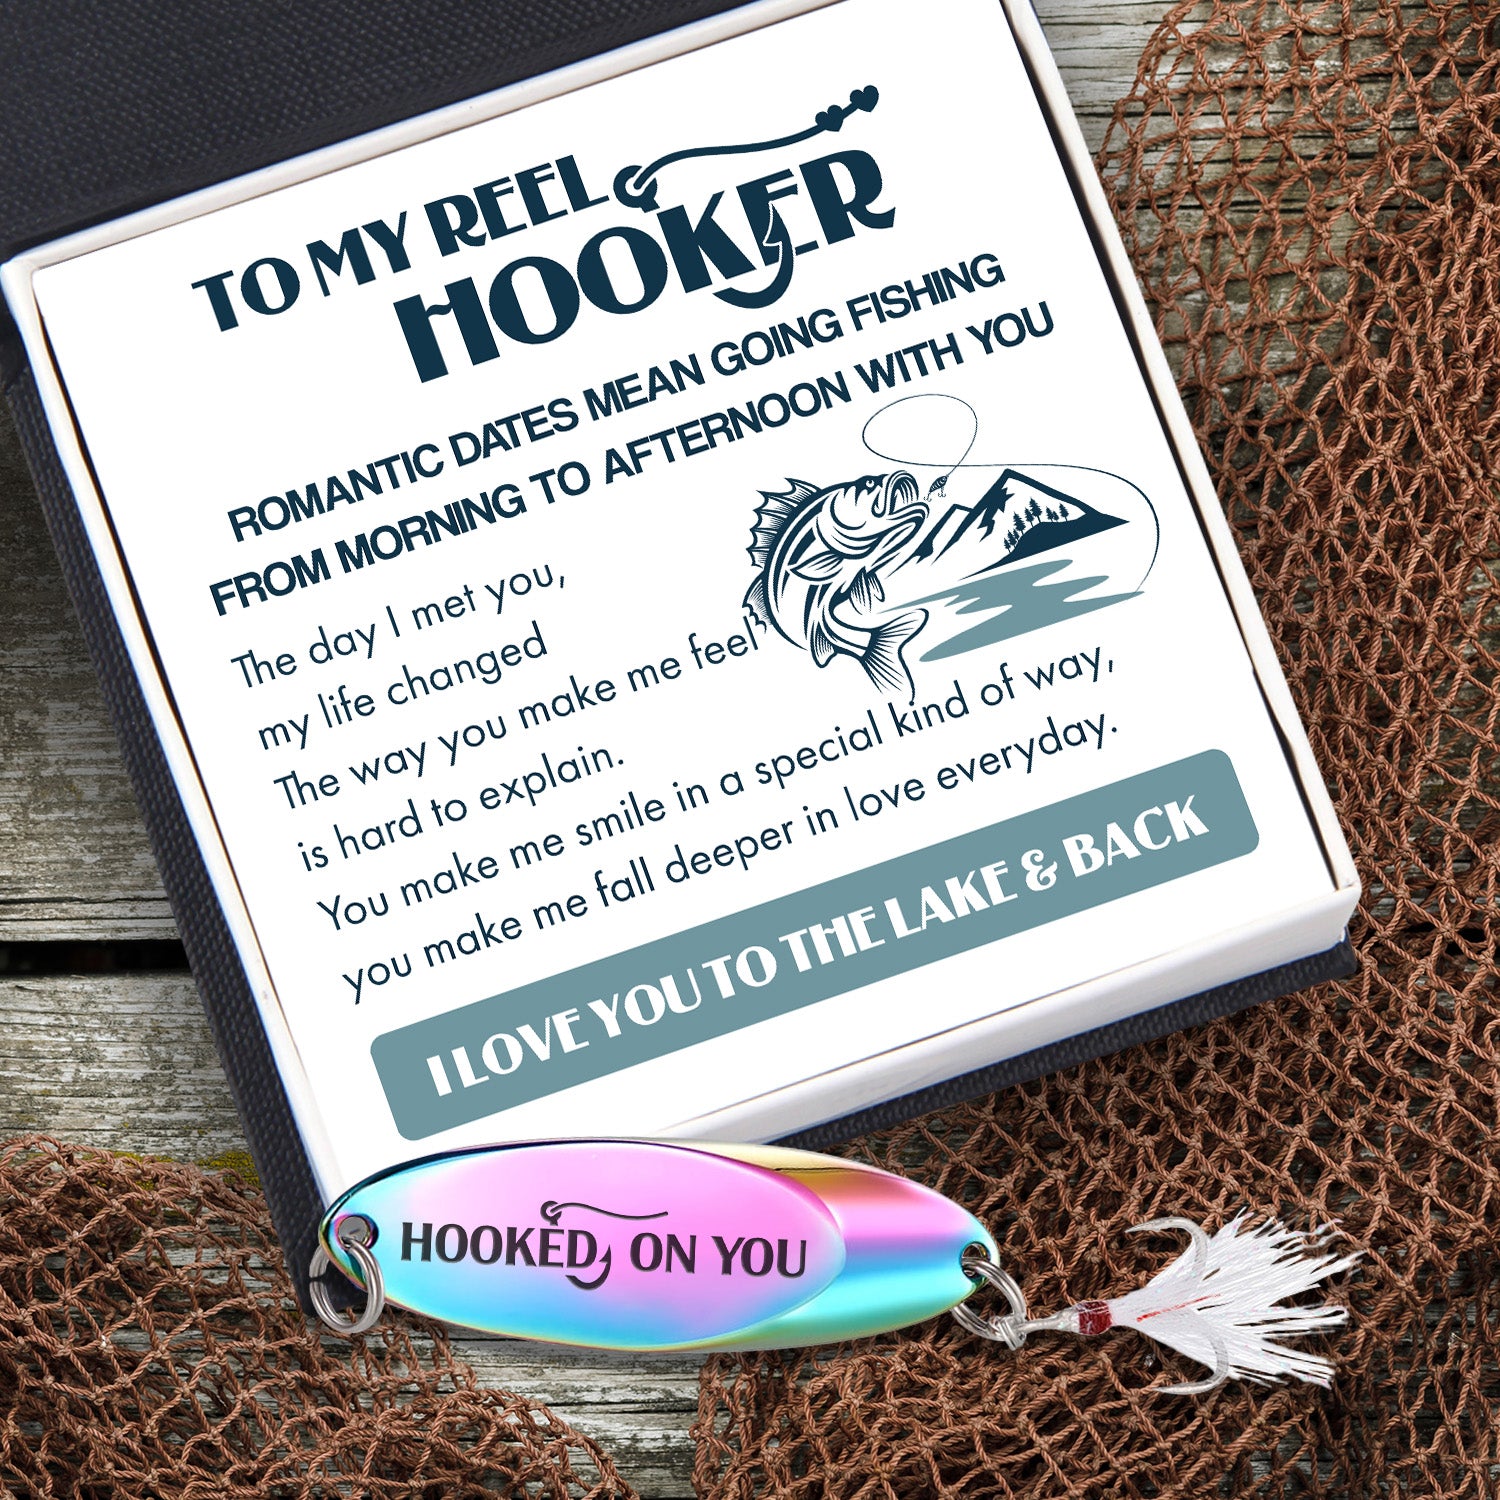 Father's Day Gift, Fishing Lure, Boyfriend Gift, Hooked On You, My